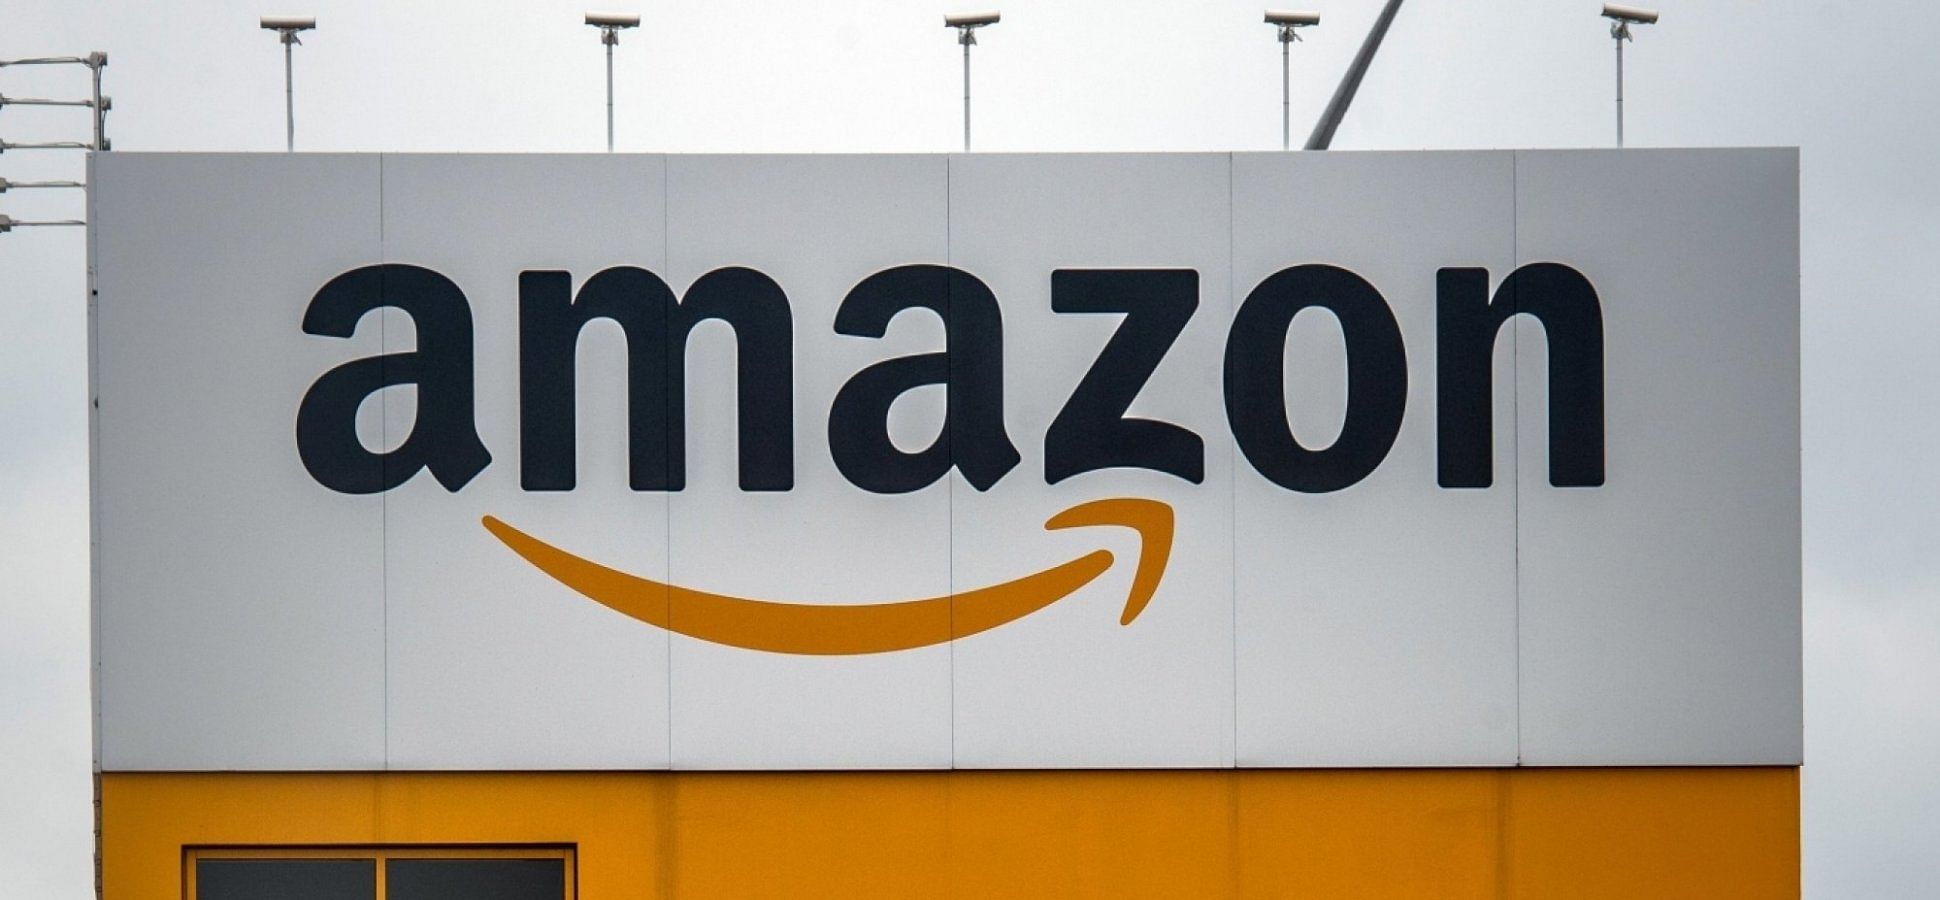 Amazon will pay users to get access to their data.